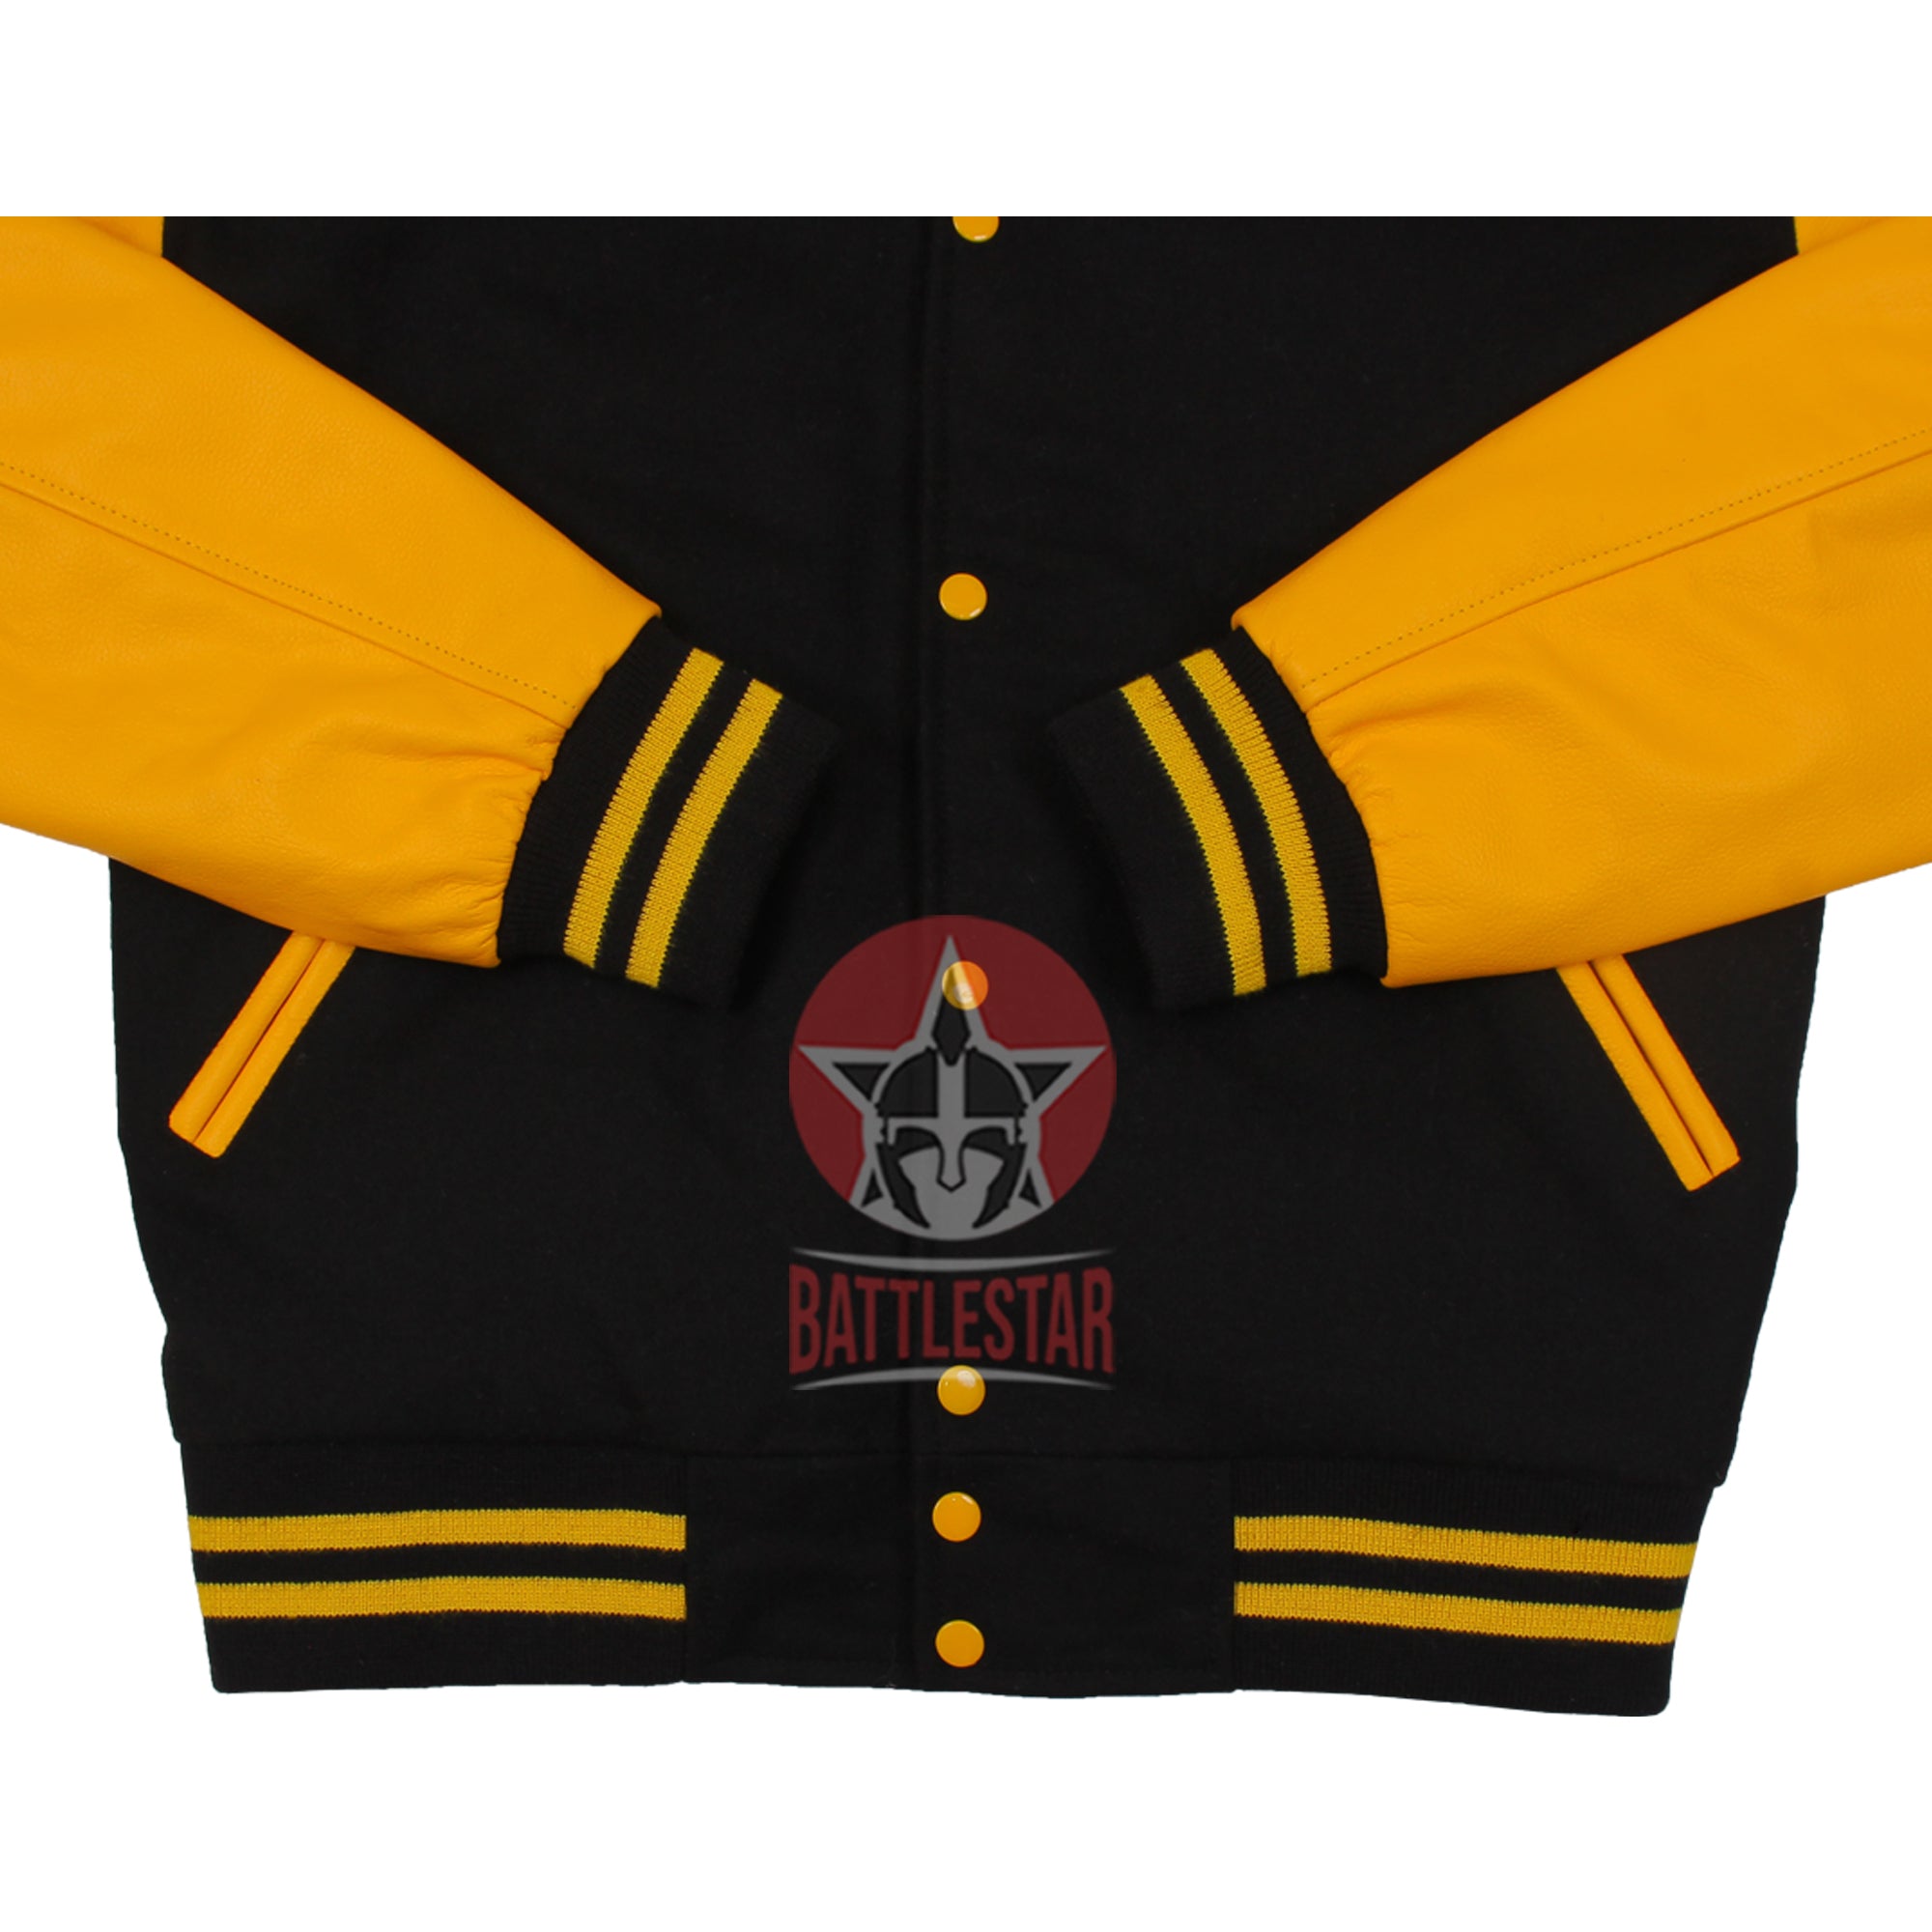 Year of the Tiger Embroidered Letterman Baseball Jacket